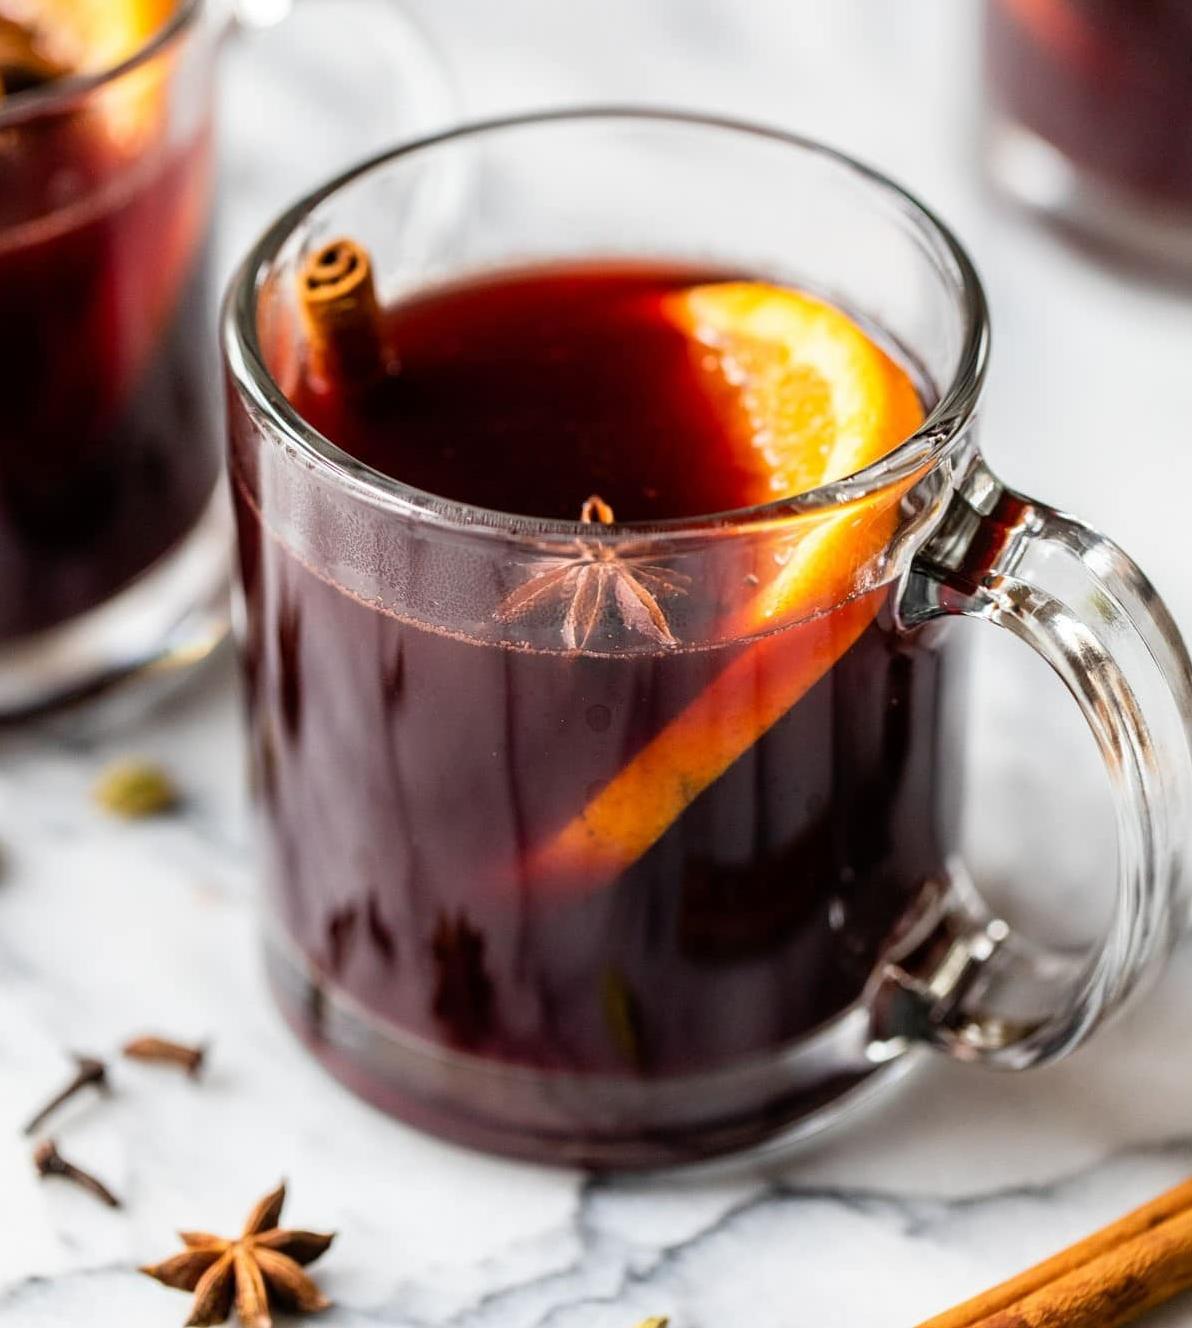  Indulge in the rich flavors of cloves and nutmeg with every sip of hot spiced wine.